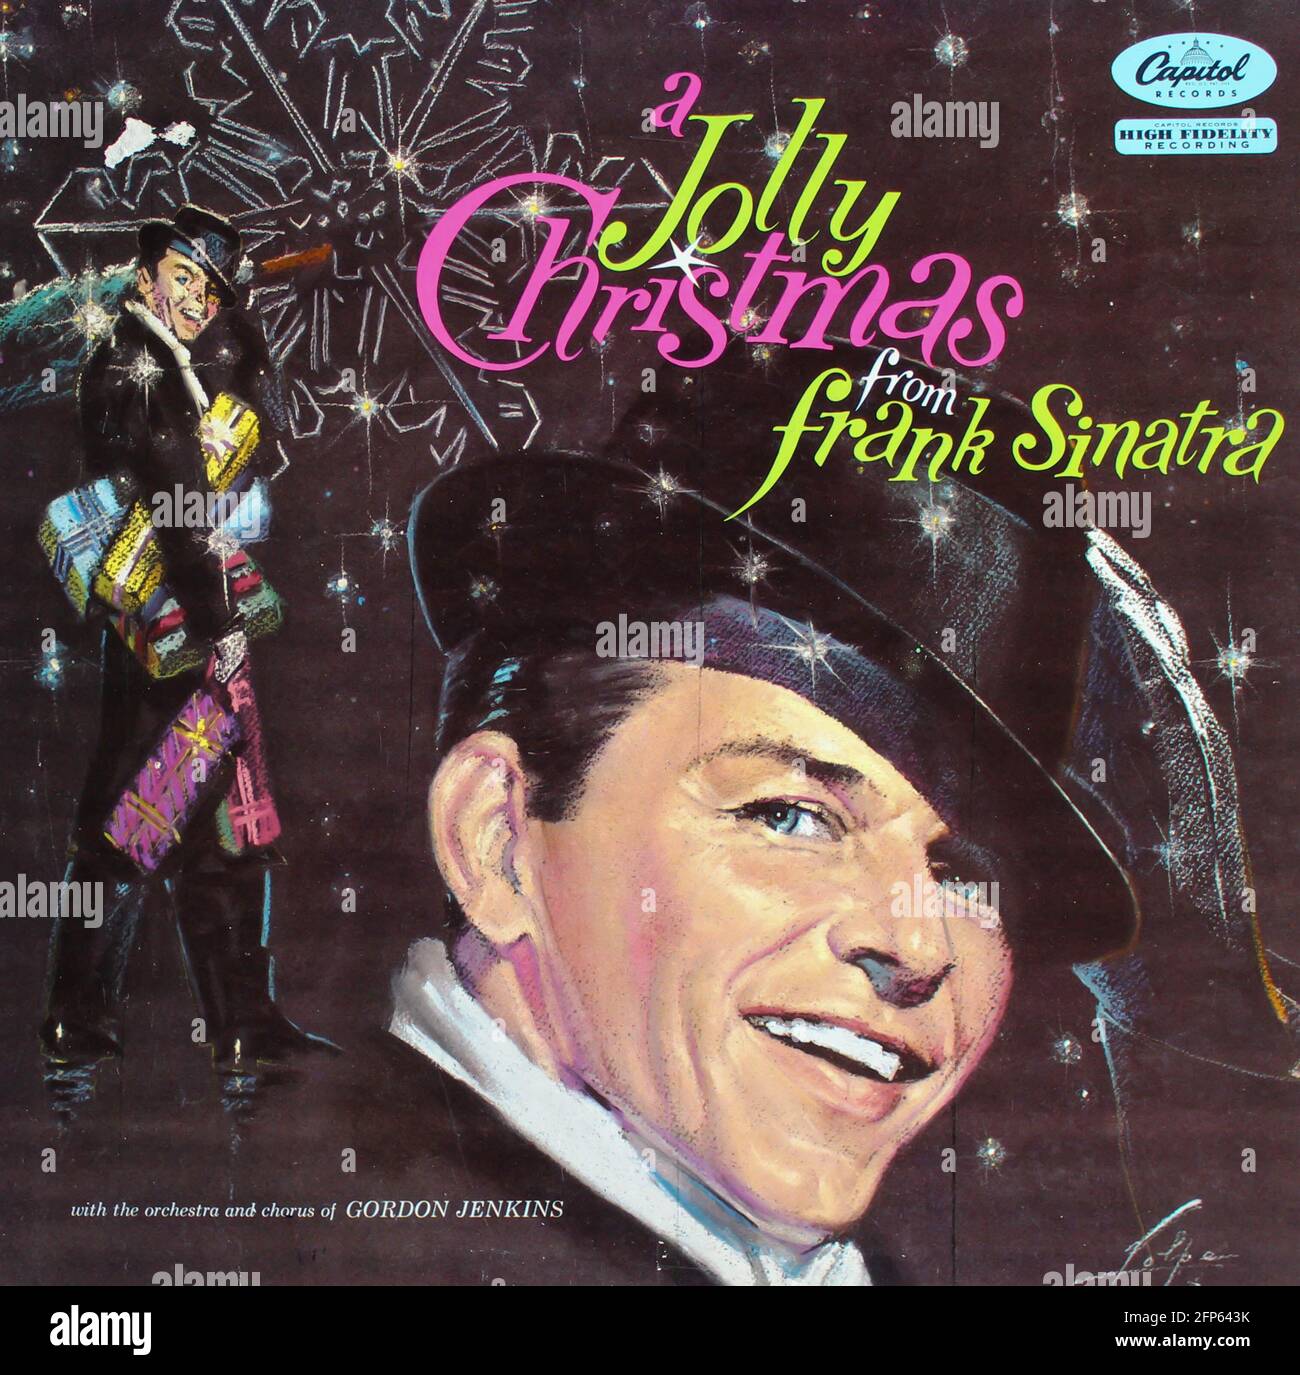 Jazz and easy listening musician, Frank Sinatra music album on vinyl record LP disc. Titled: A Jolly Christmas from Frank Sinatra album cover Stock Photo